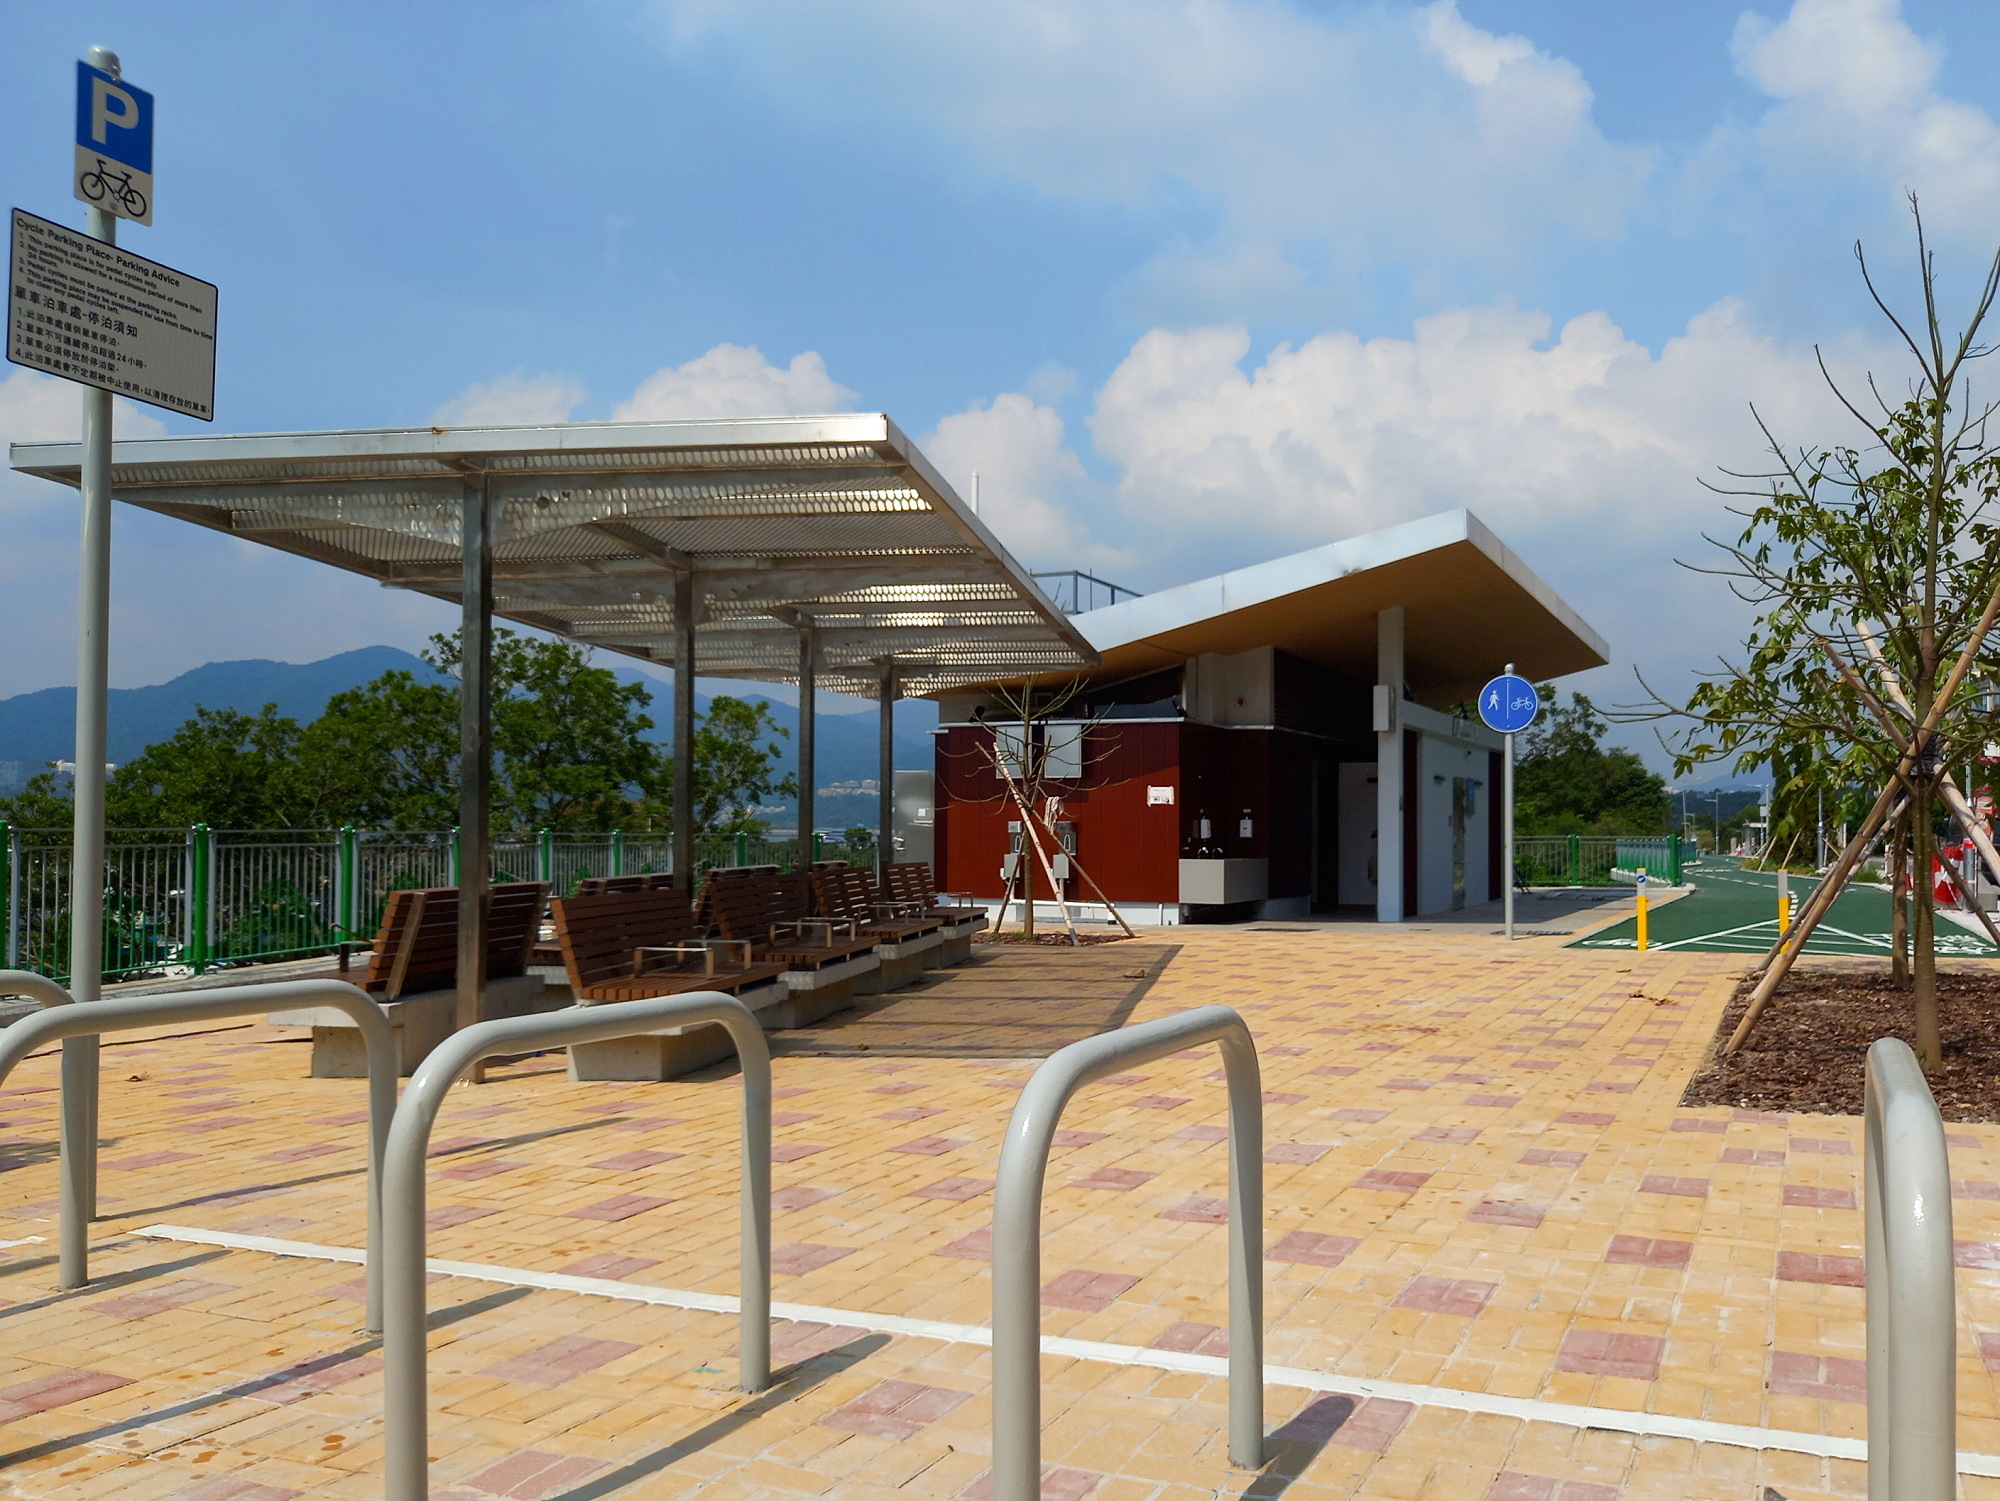 The Civil Engineering and Development Department today (July 31) announced that the Sam Mun Tsai waterfront cycle track in Tai Po has been opened. Photo shows the resting station providing ancillary facilities for cyclists to rest or visit nearby attractions. 